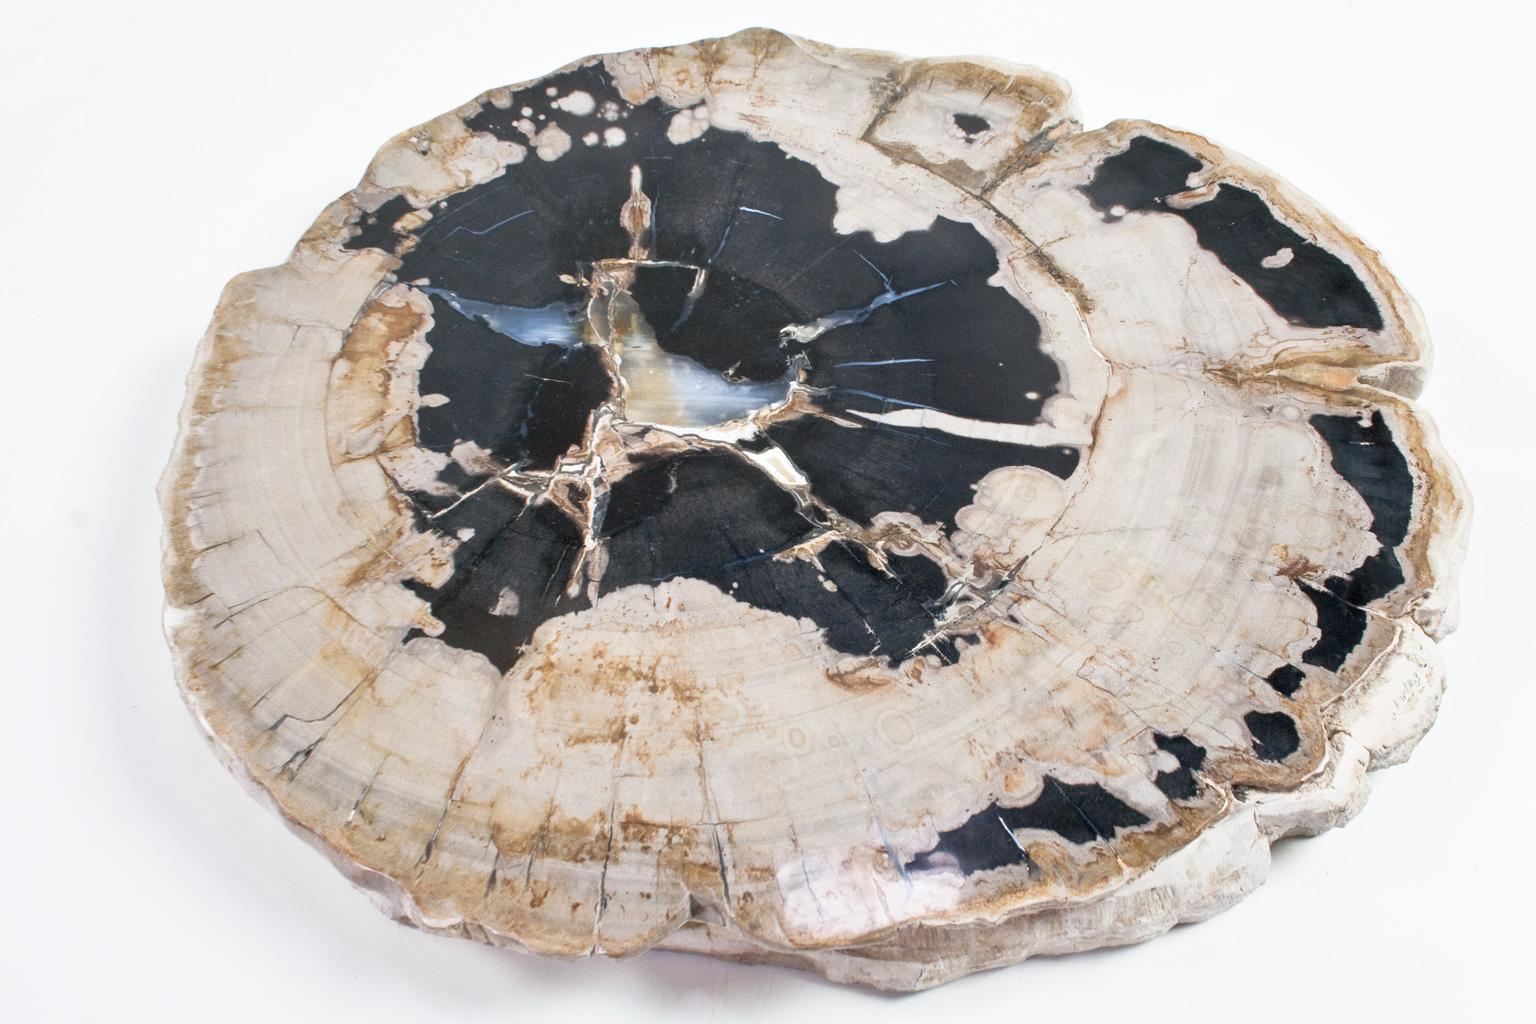 Hand picked petrified wood slice or tabletop in off white and black, smooth sanded and polished. The object still holds the organic and typically wooden tissue and carvings. 

Petrified wood is perfect as a cocktail table, side table or as a